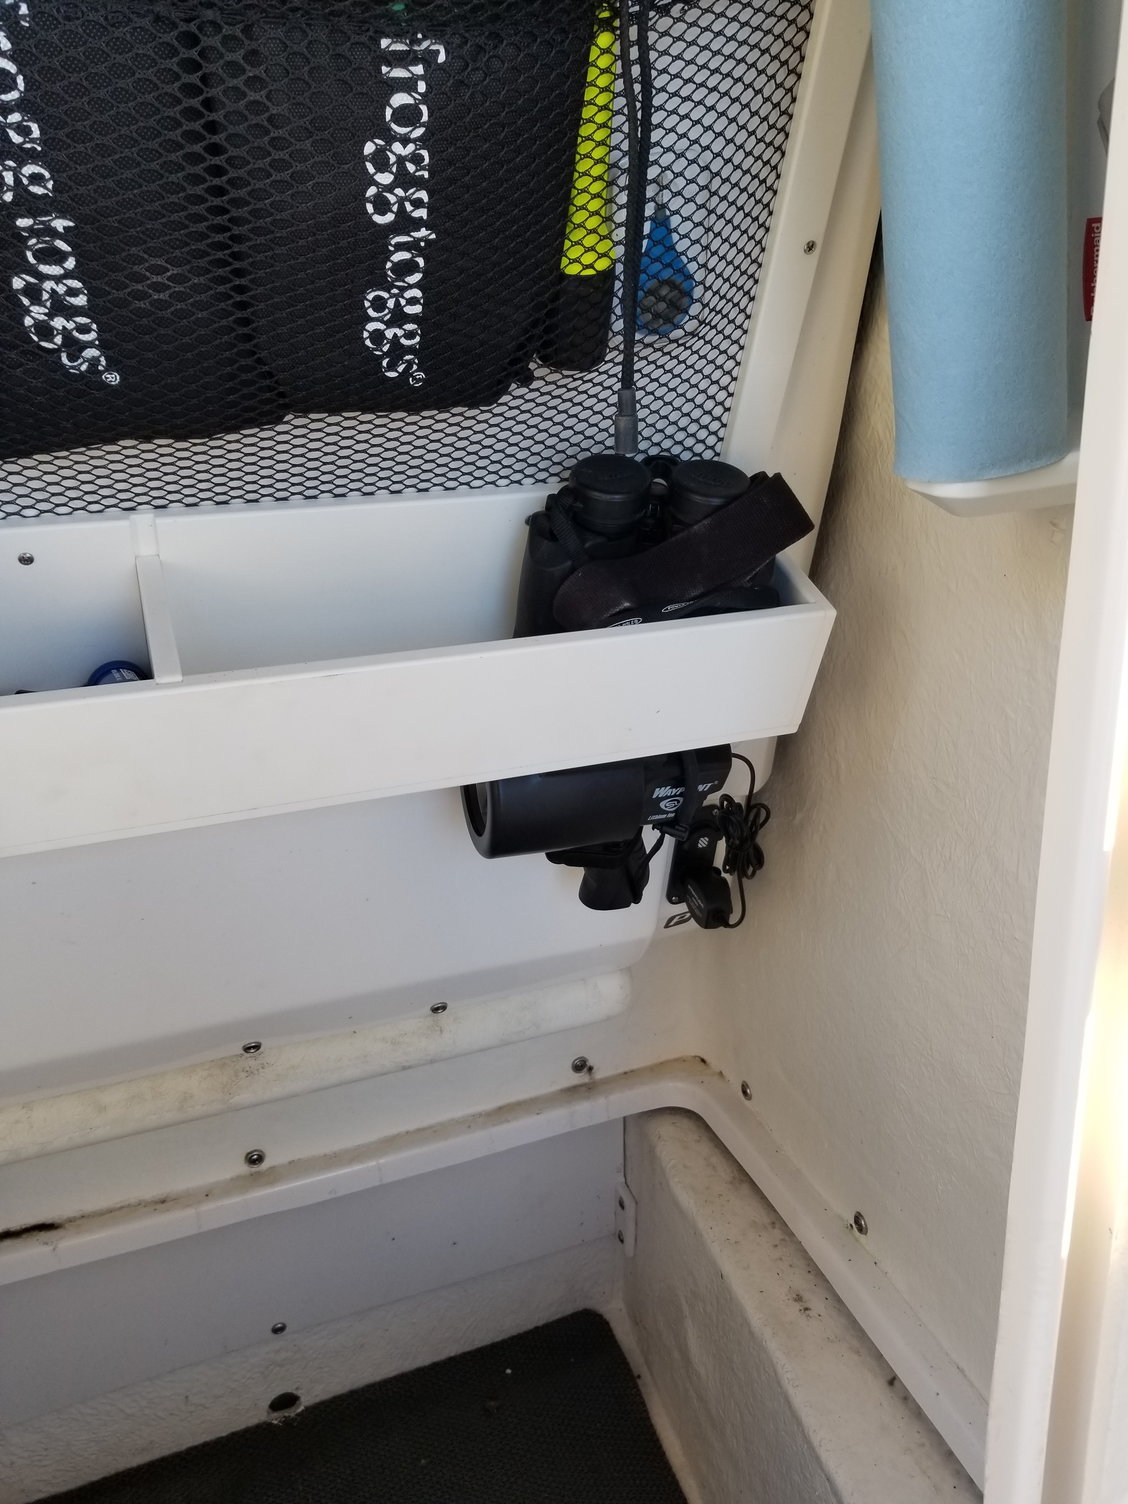 Show me your center console - console storage management - The Hull Truth -  Boating and Fishing Forum